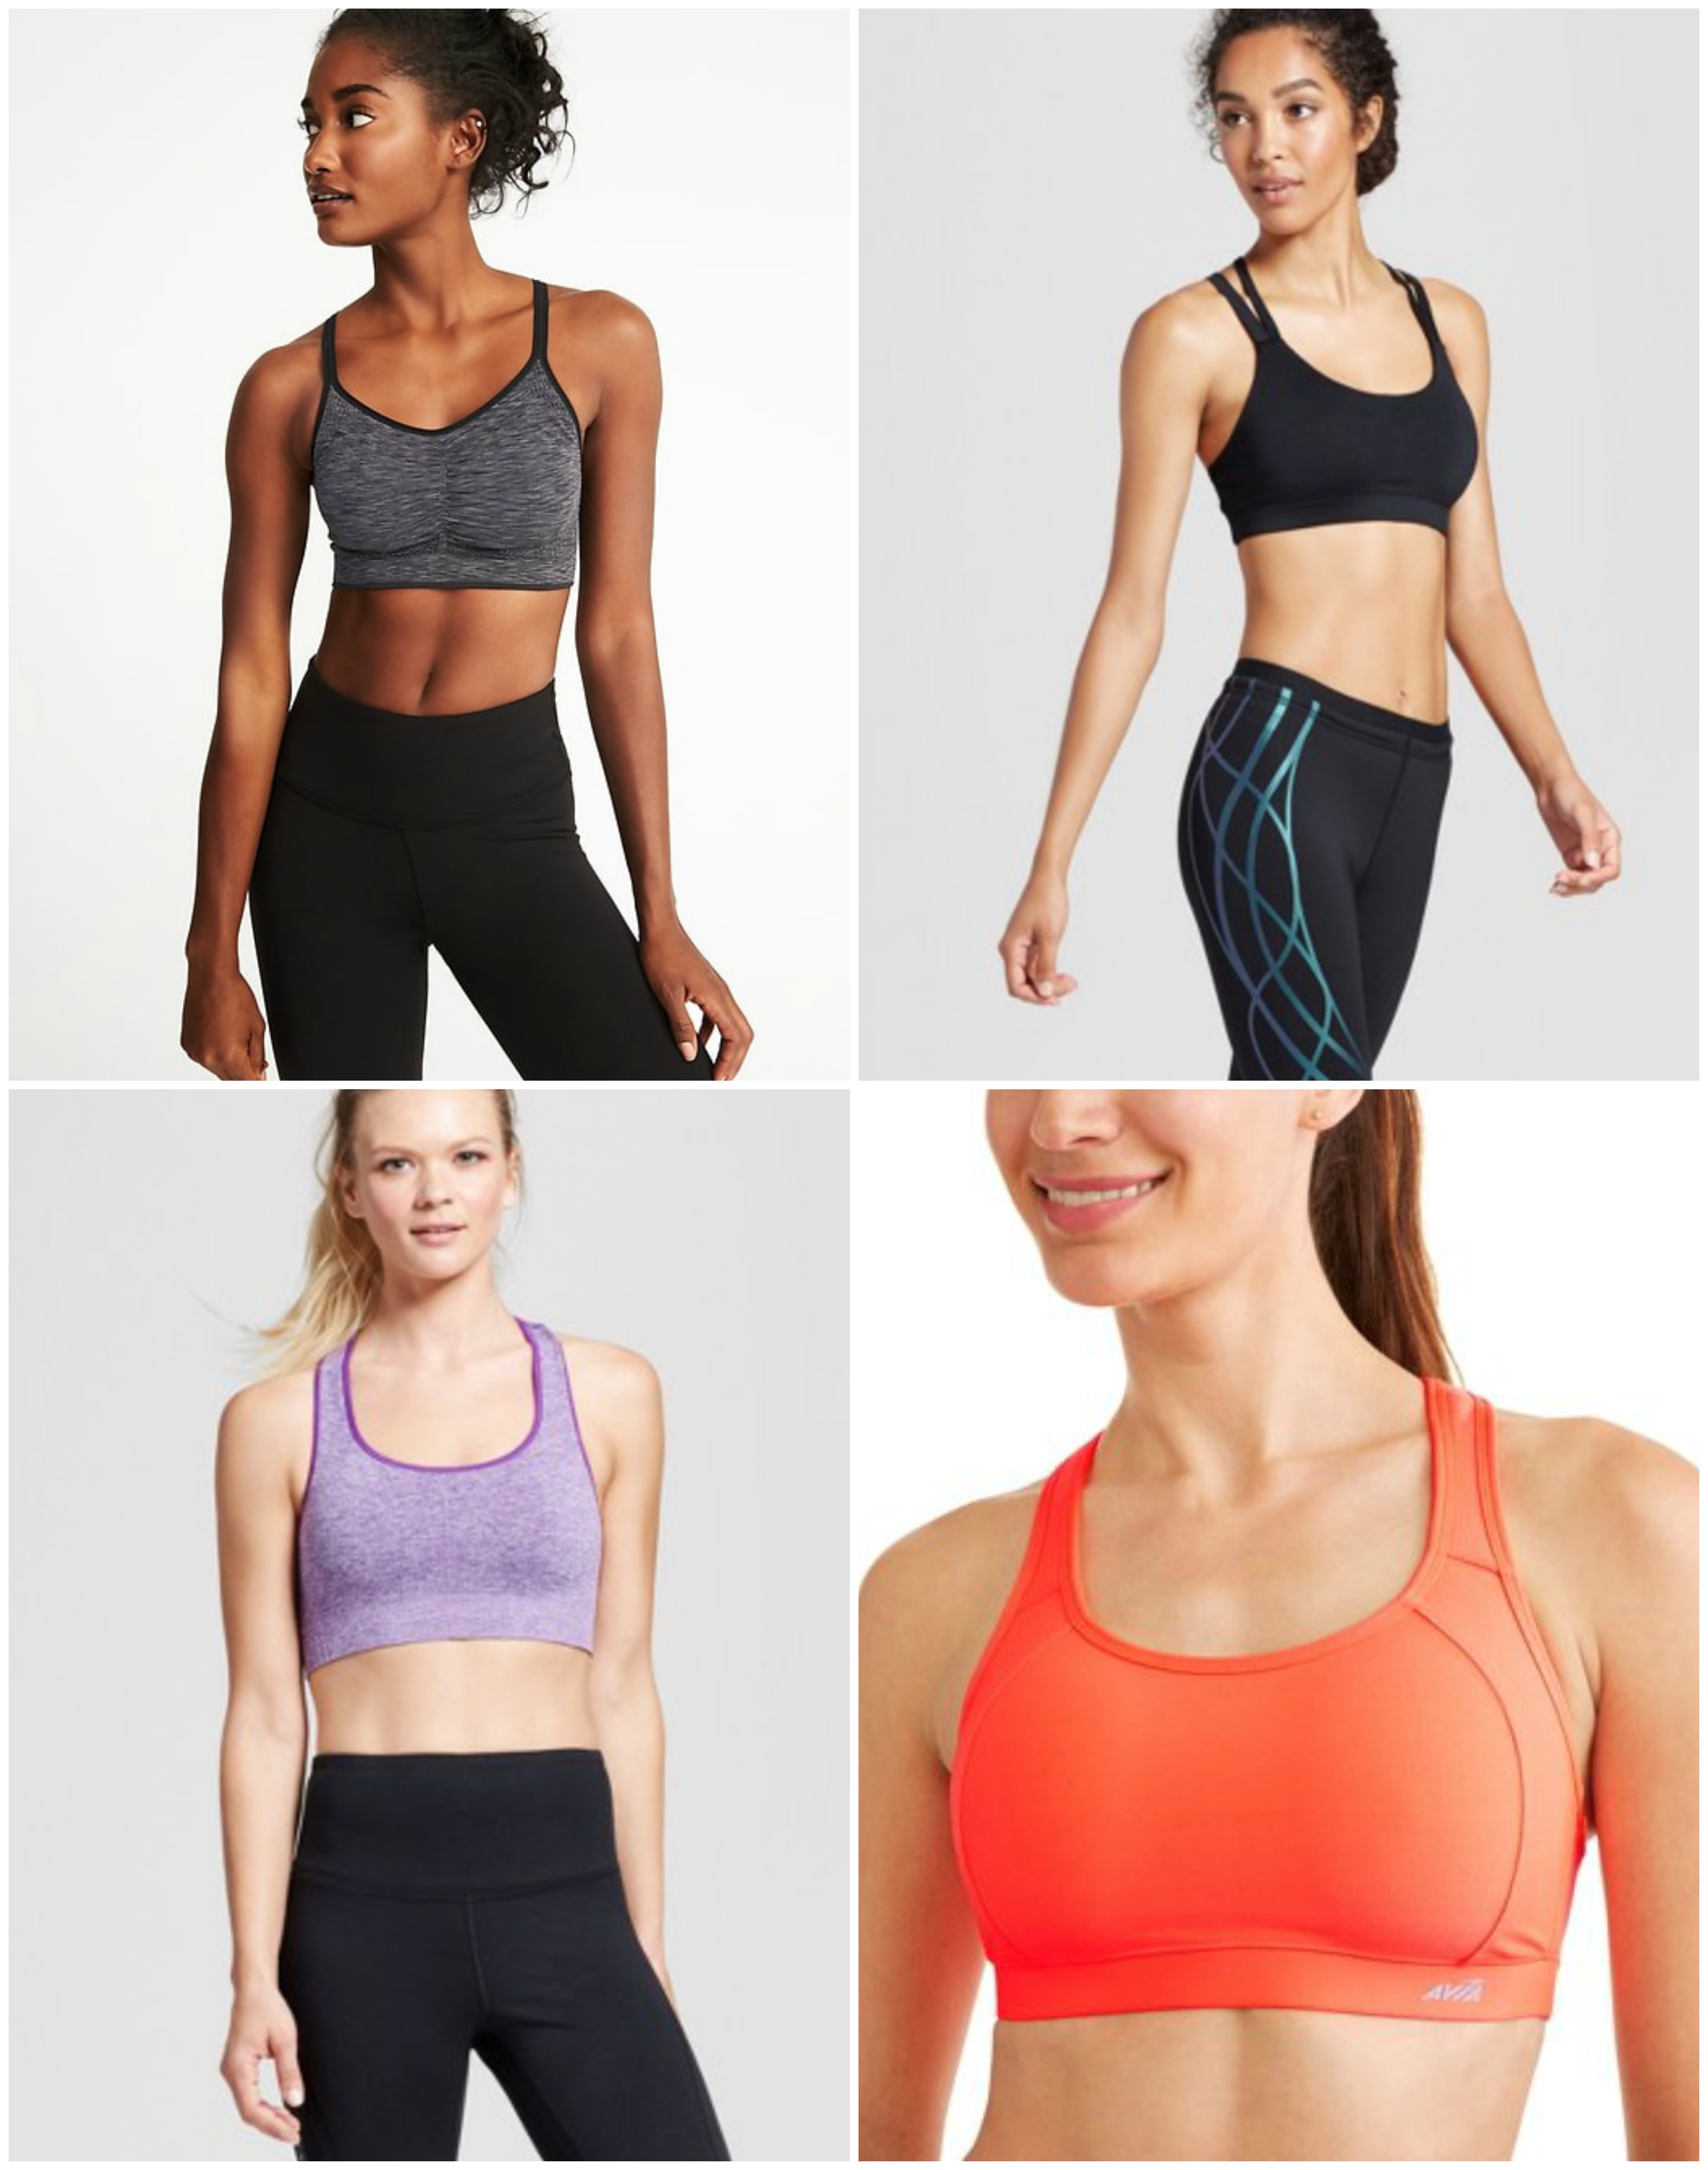 4 Sports Bras I Swear By - Fitness Apparel For Women - Affordable Sports Bras - Cheap Sports Bras - Communikait by Kait Hanson